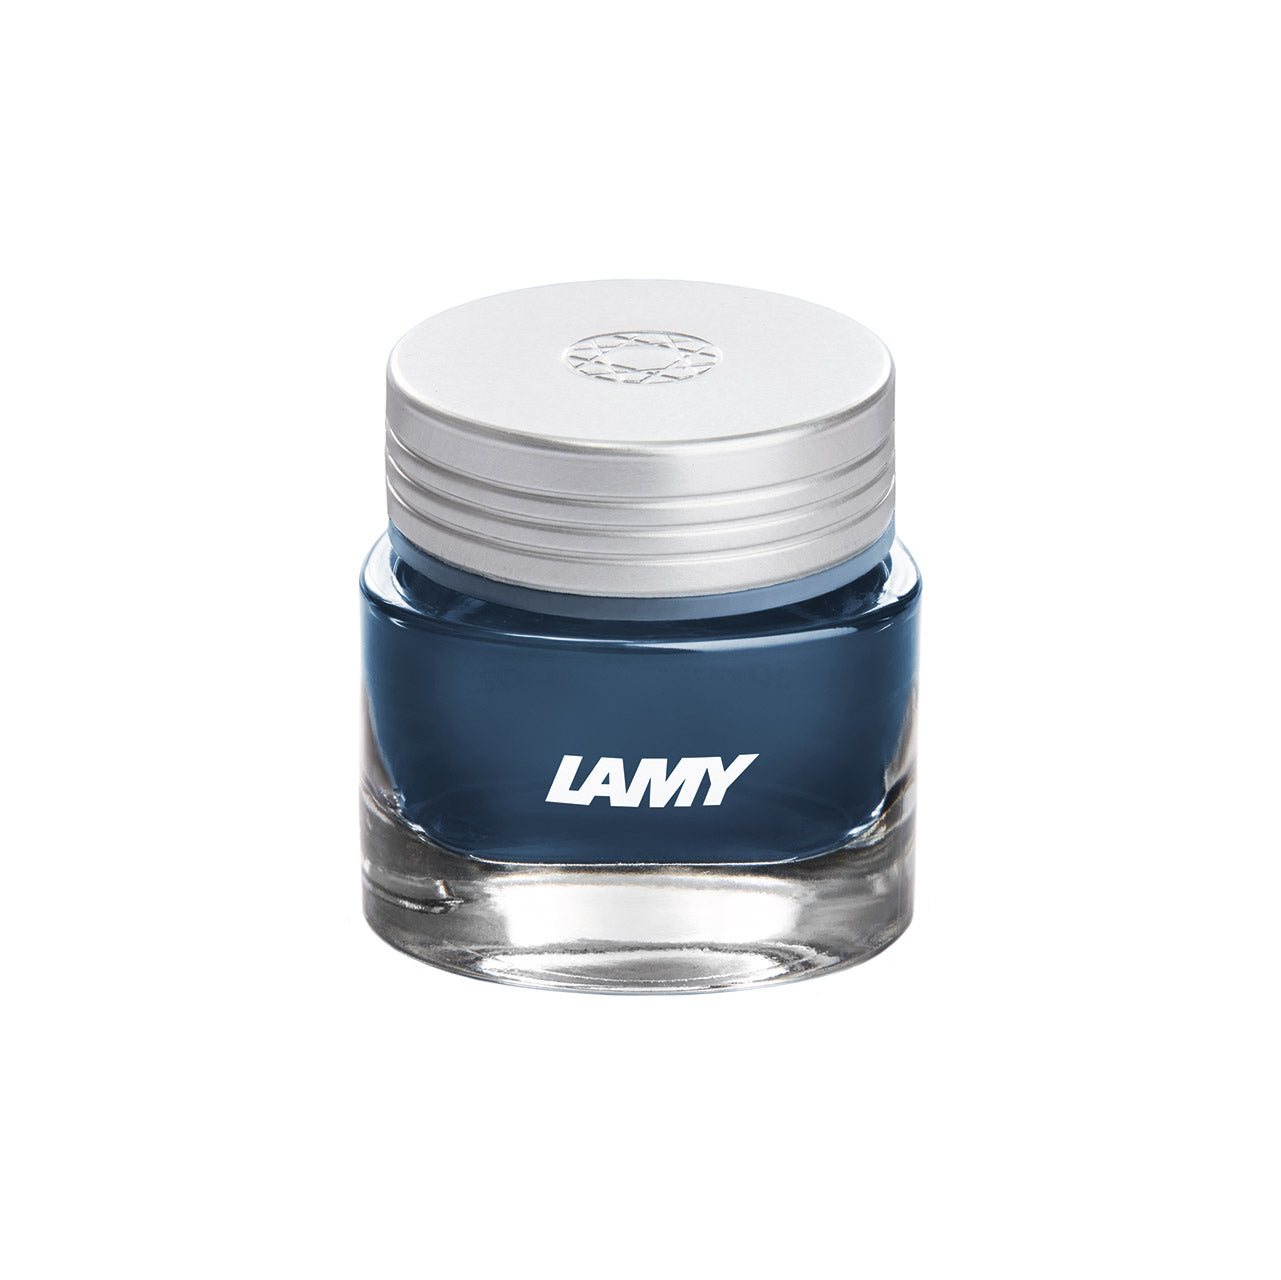 Lamy T53 Ink Bottle 380 Benitoite 30ml - Pencraft the boutique